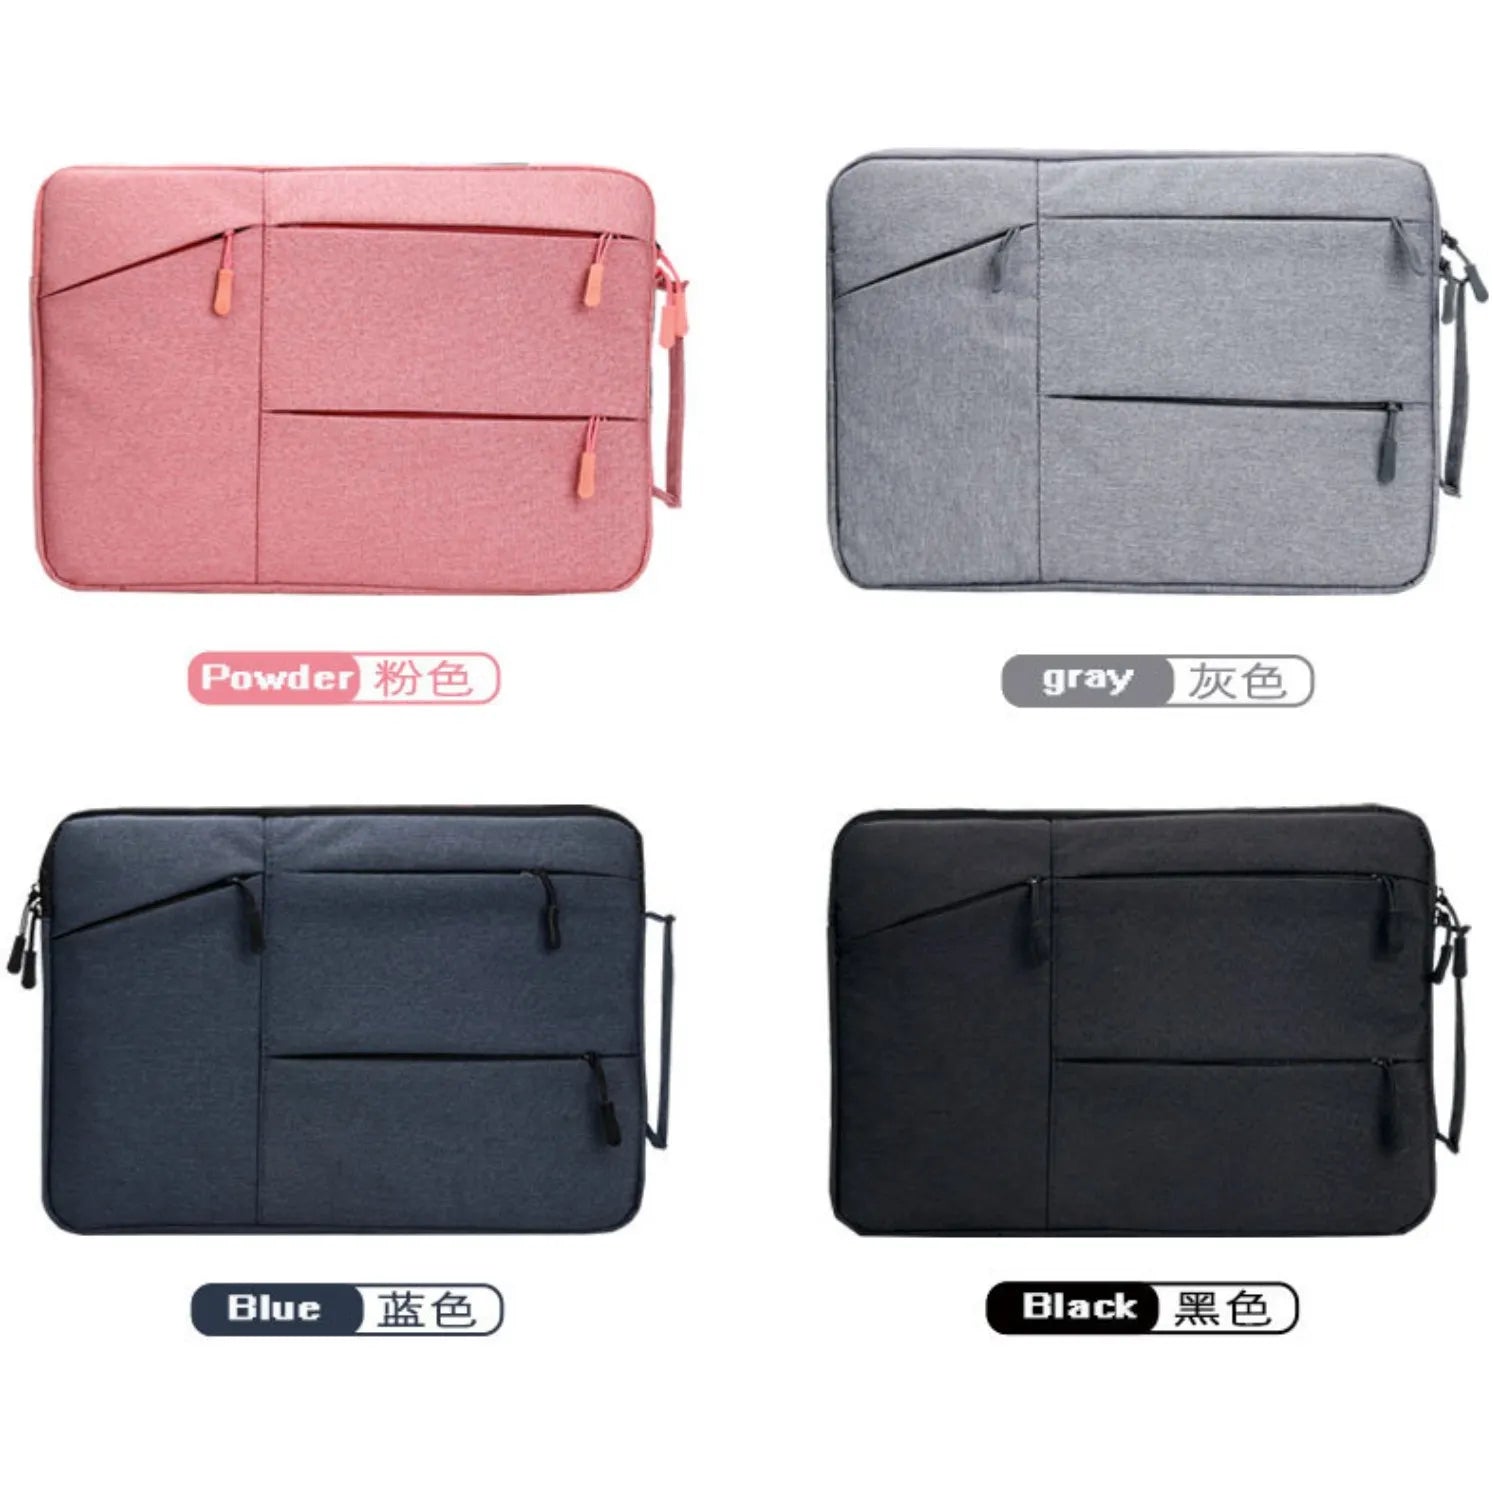 Laptop Bag PC Case 13-15.6 Inch Cover Sleeve for MacBook Air/Pro, Redmi, Macbook M1